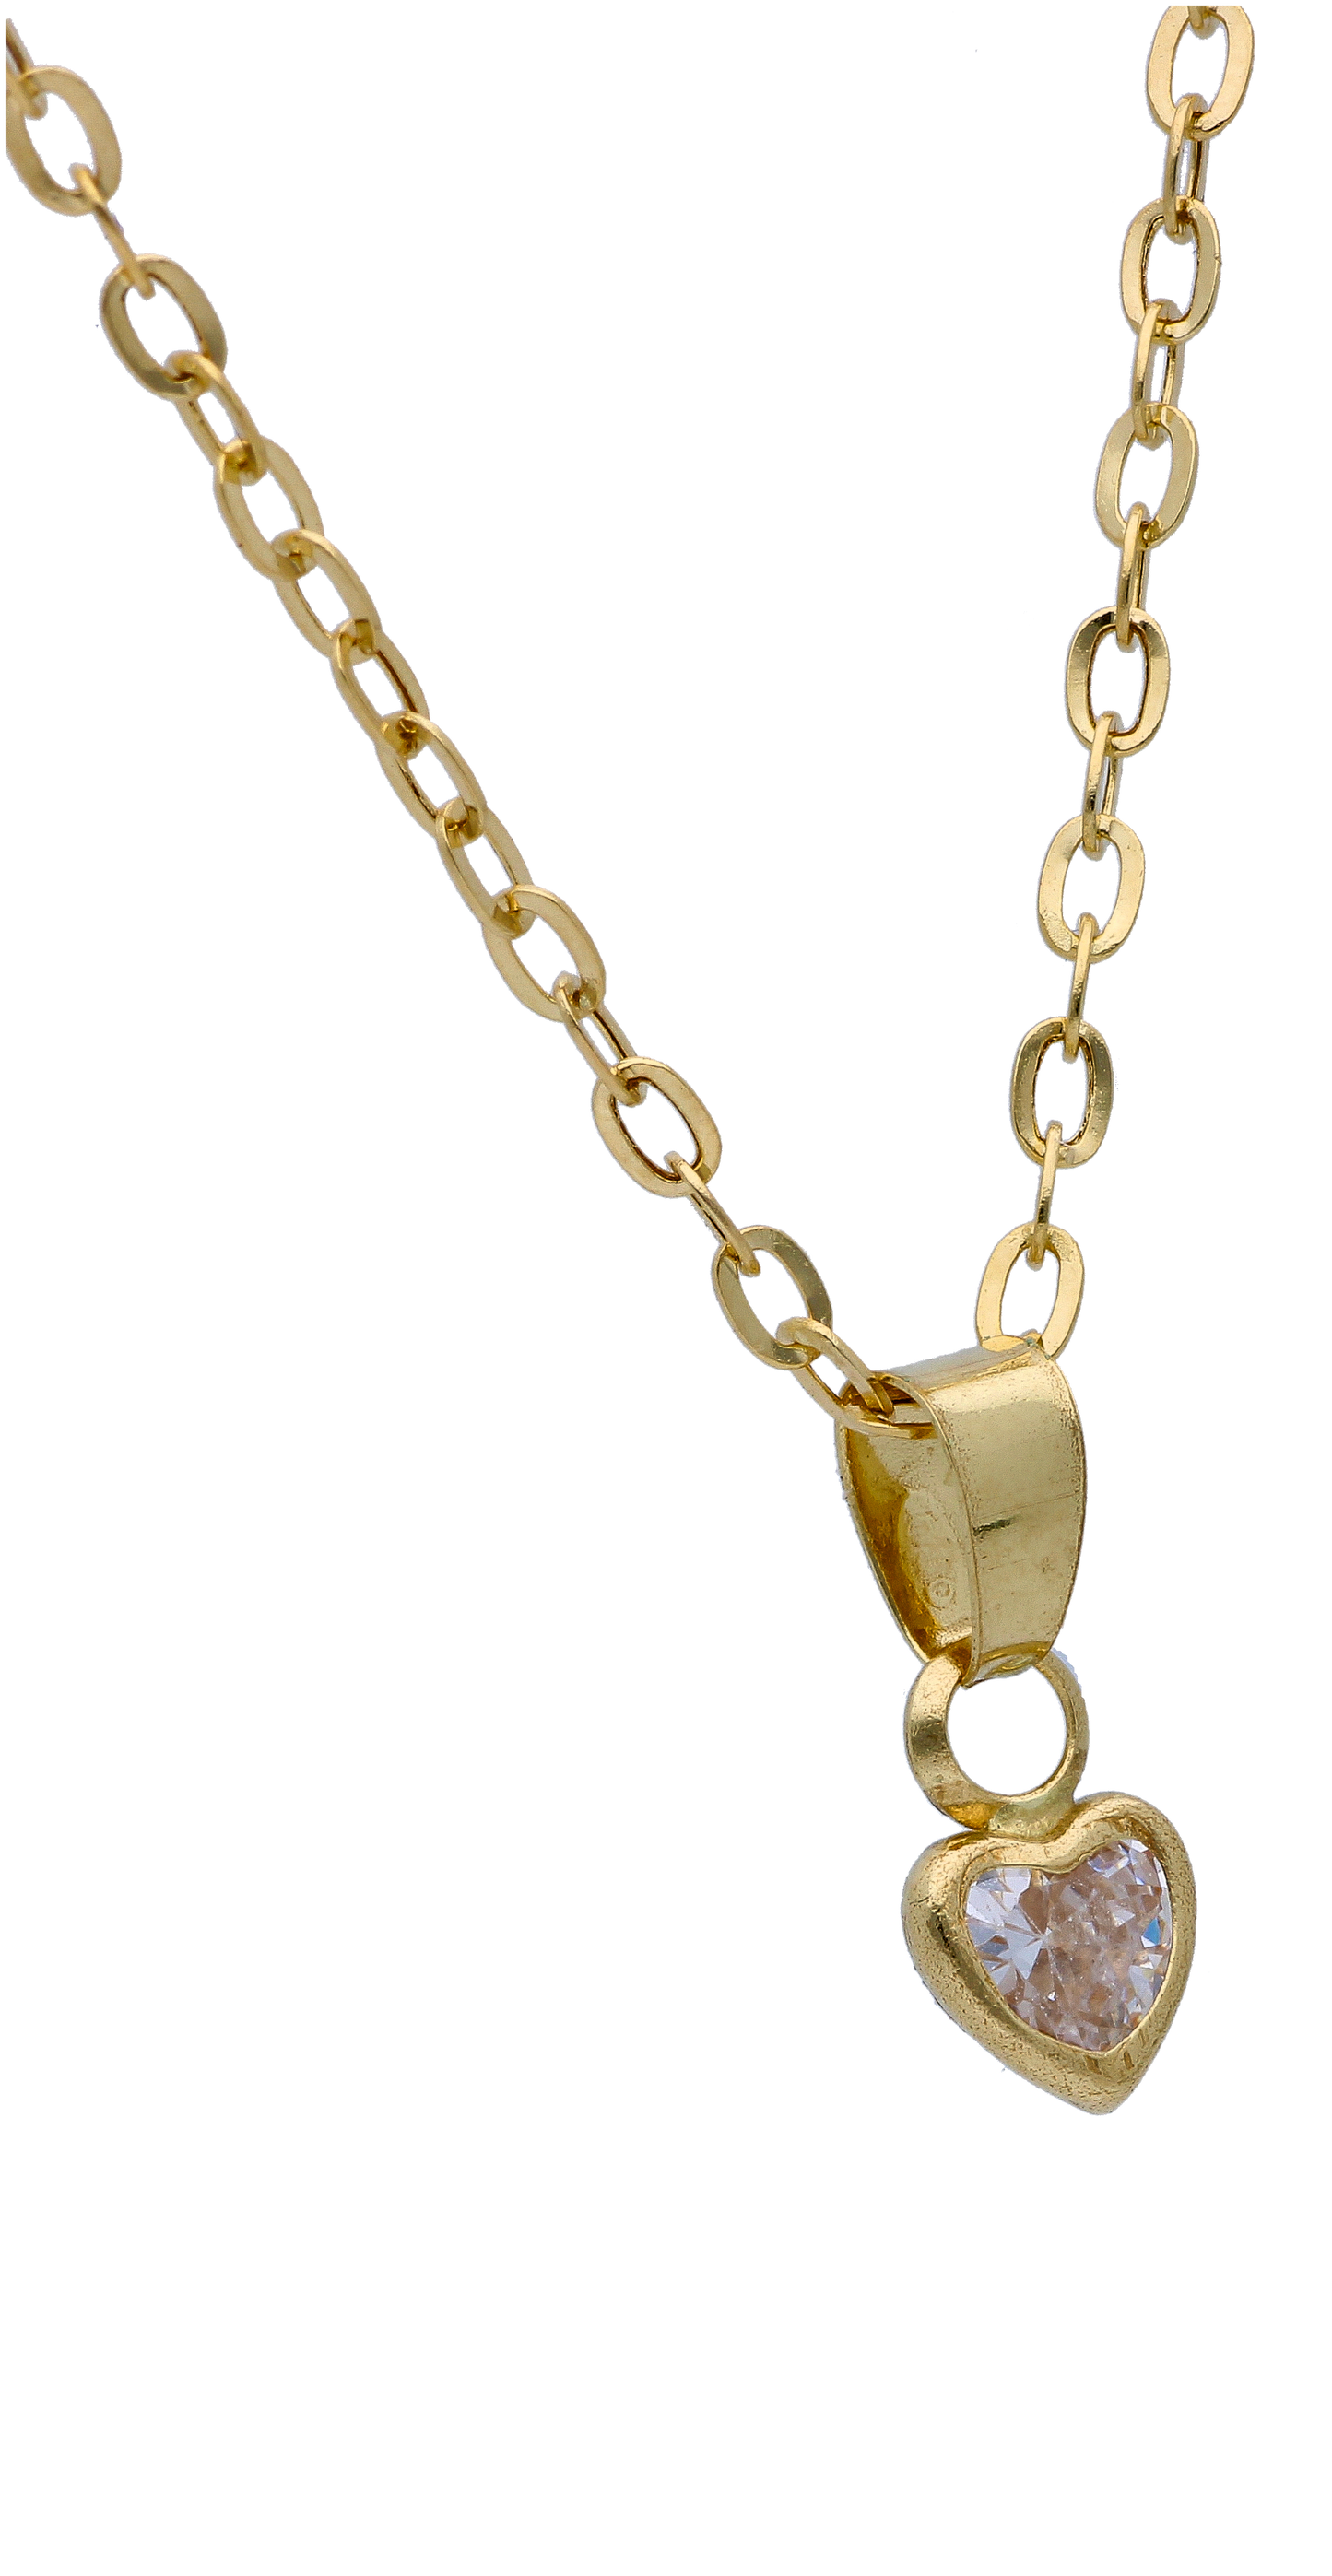 Gold Necklace (Chain with Heart Shaped Pendant) 18KT - FKJNKL18KU6303